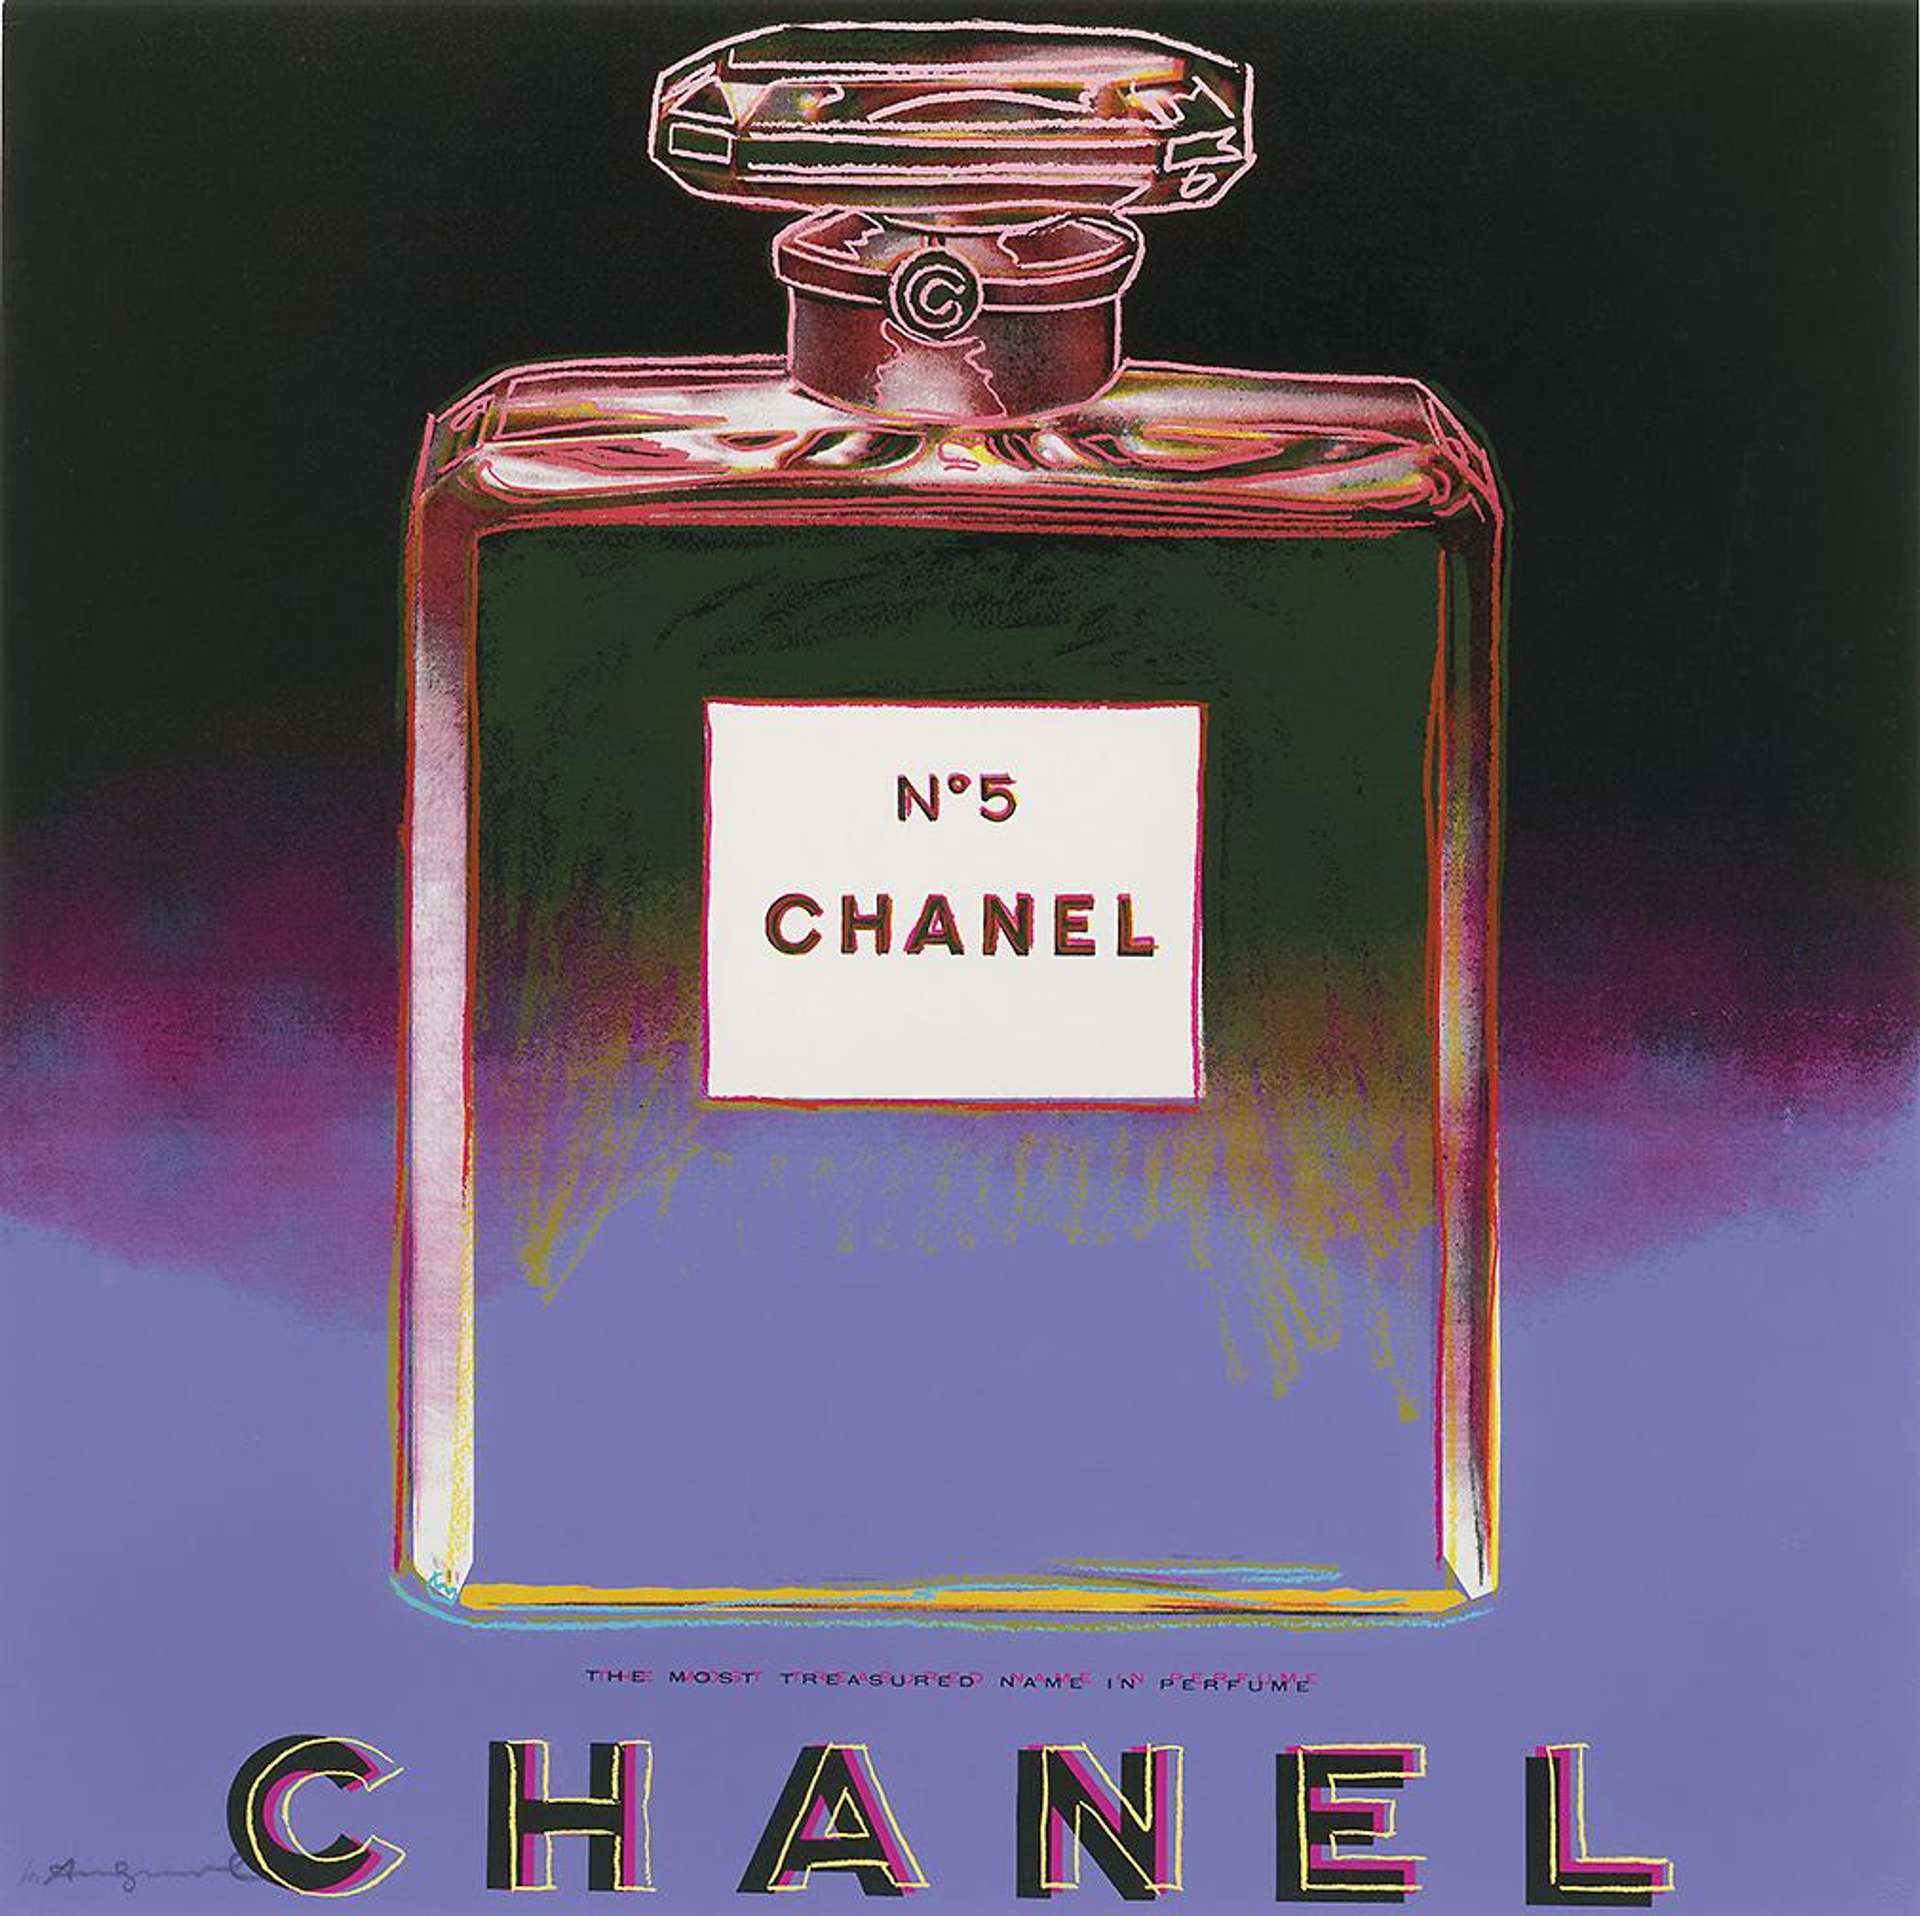 A screenprint depicting a bottle of Chanel No. 5 perfume against a blue and purple gradient background.